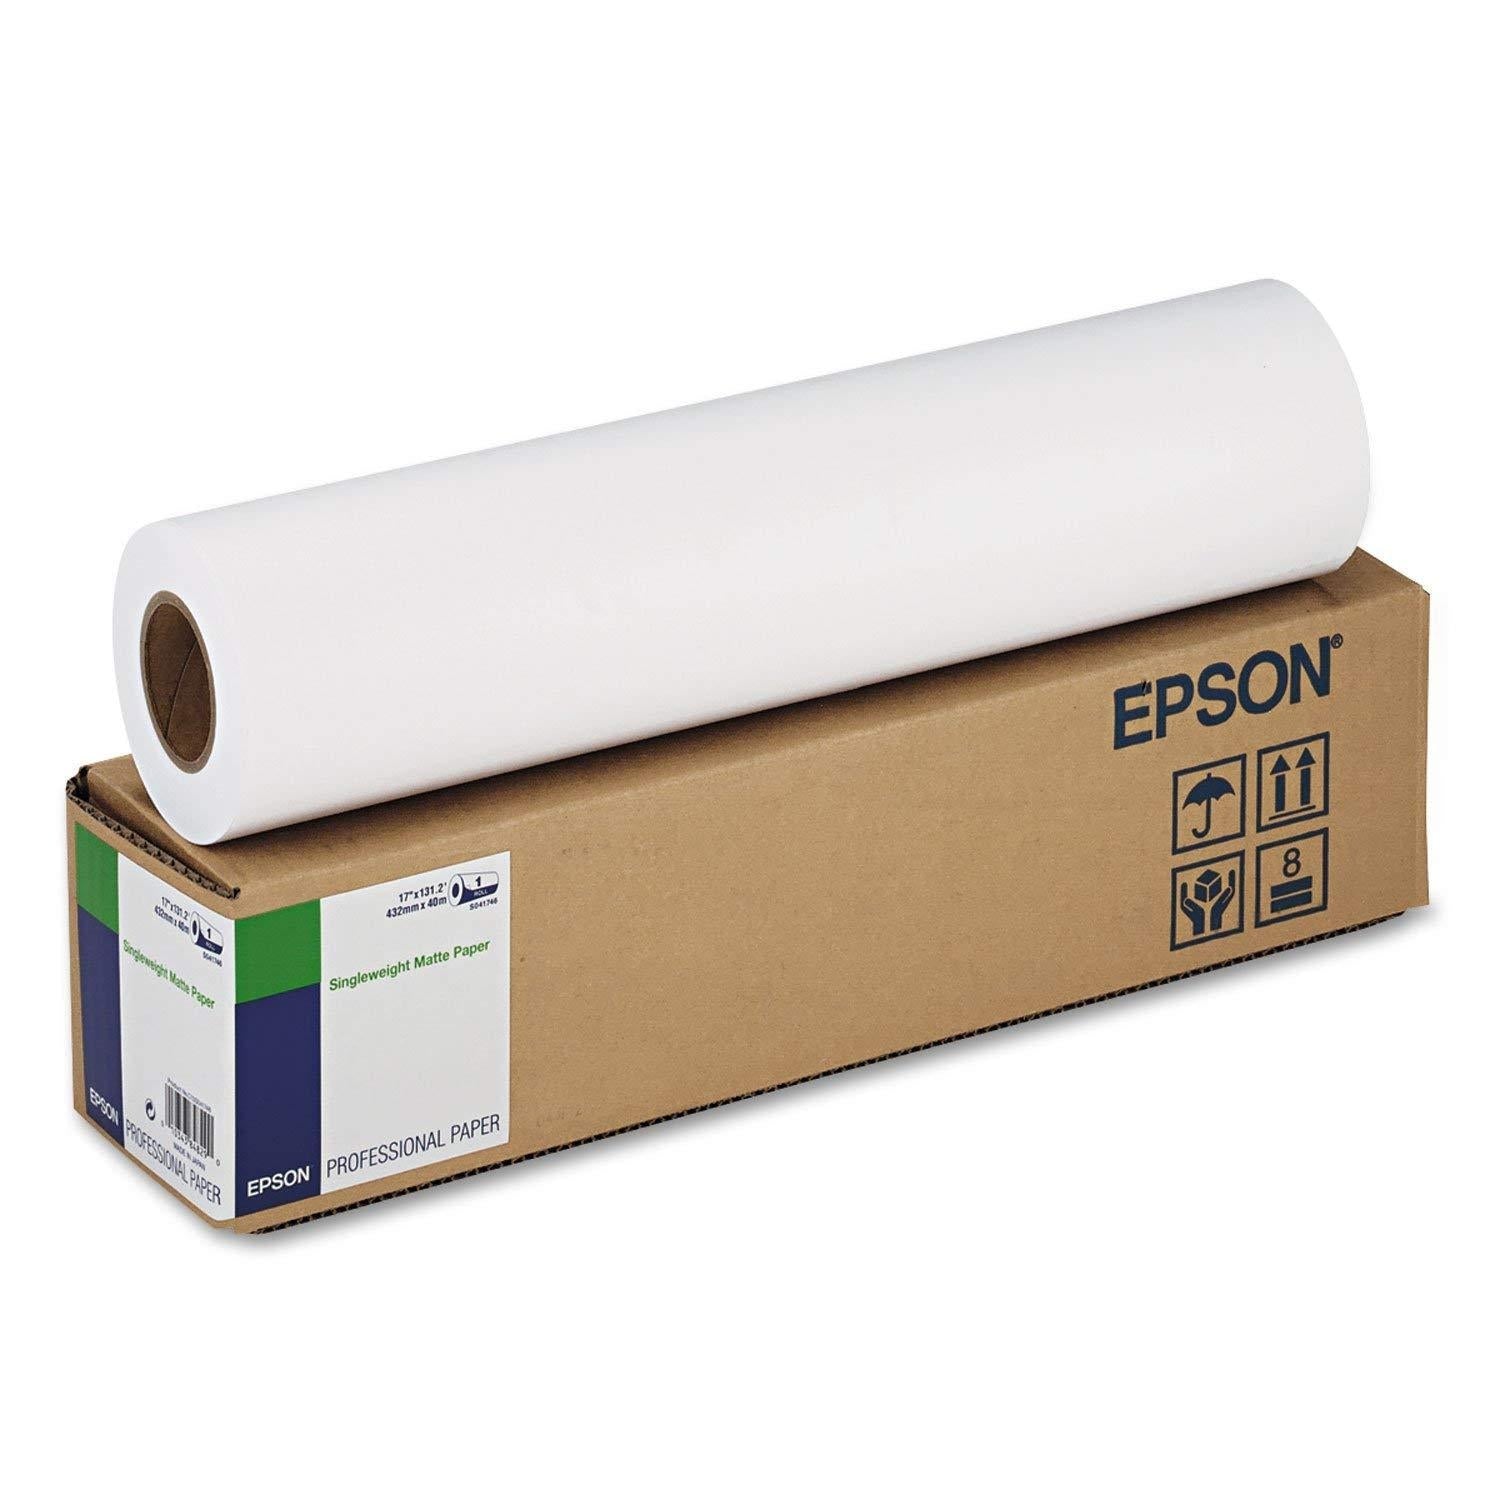 Epson Singleweight Matte Paper photo paper 17" x 50 ft` (S041746) - V&L Canada